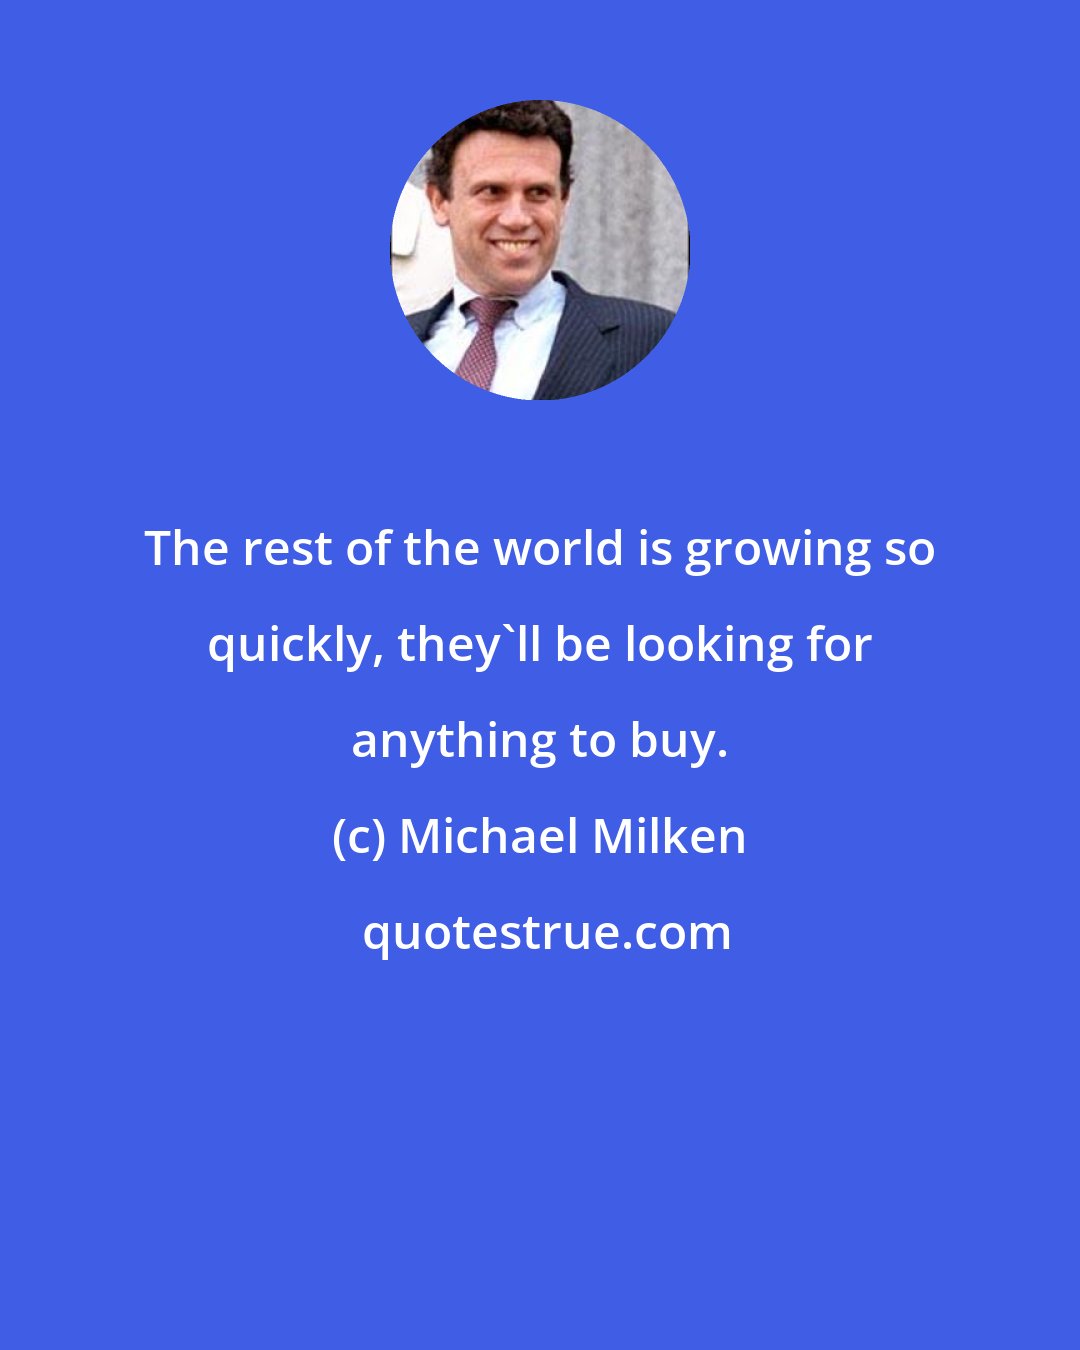 Michael Milken: The rest of the world is growing so quickly, they'll be looking for anything to buy.